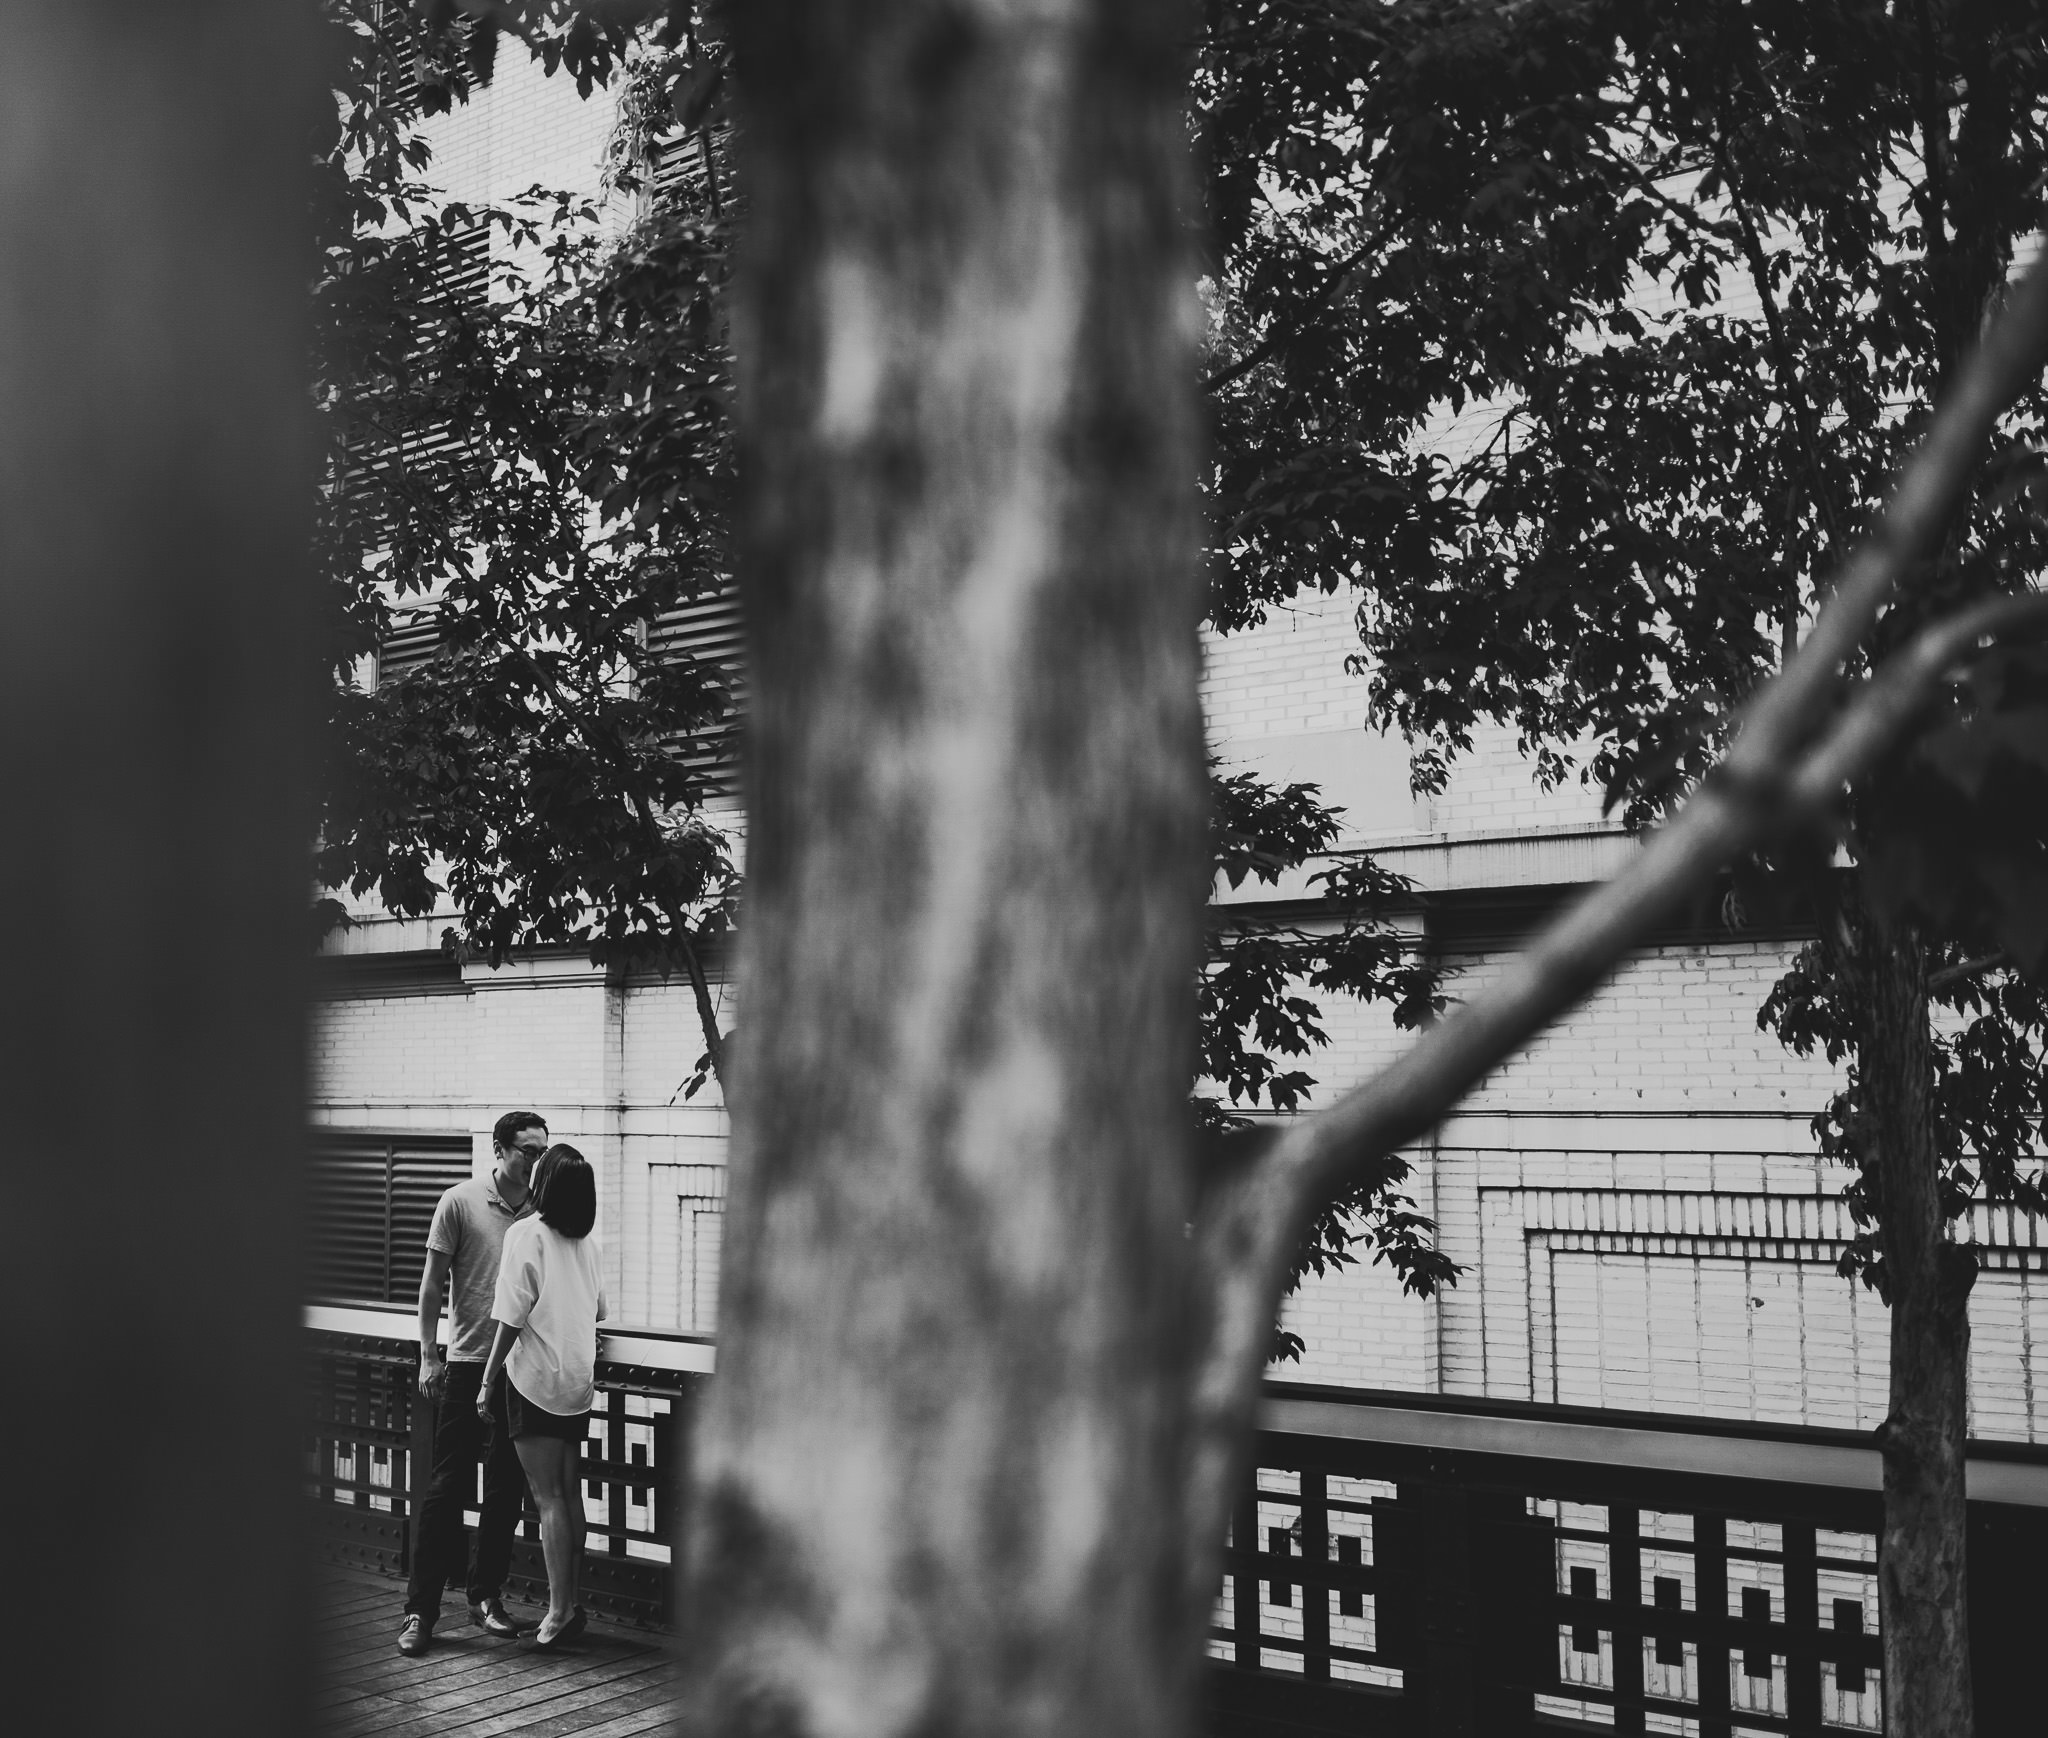  Photographs from Justine and Adrian's engagement session on the High Line in Chelsea, Manhattan. I love taking unique locations like this in New York to stretch myself creatively and try something new. 